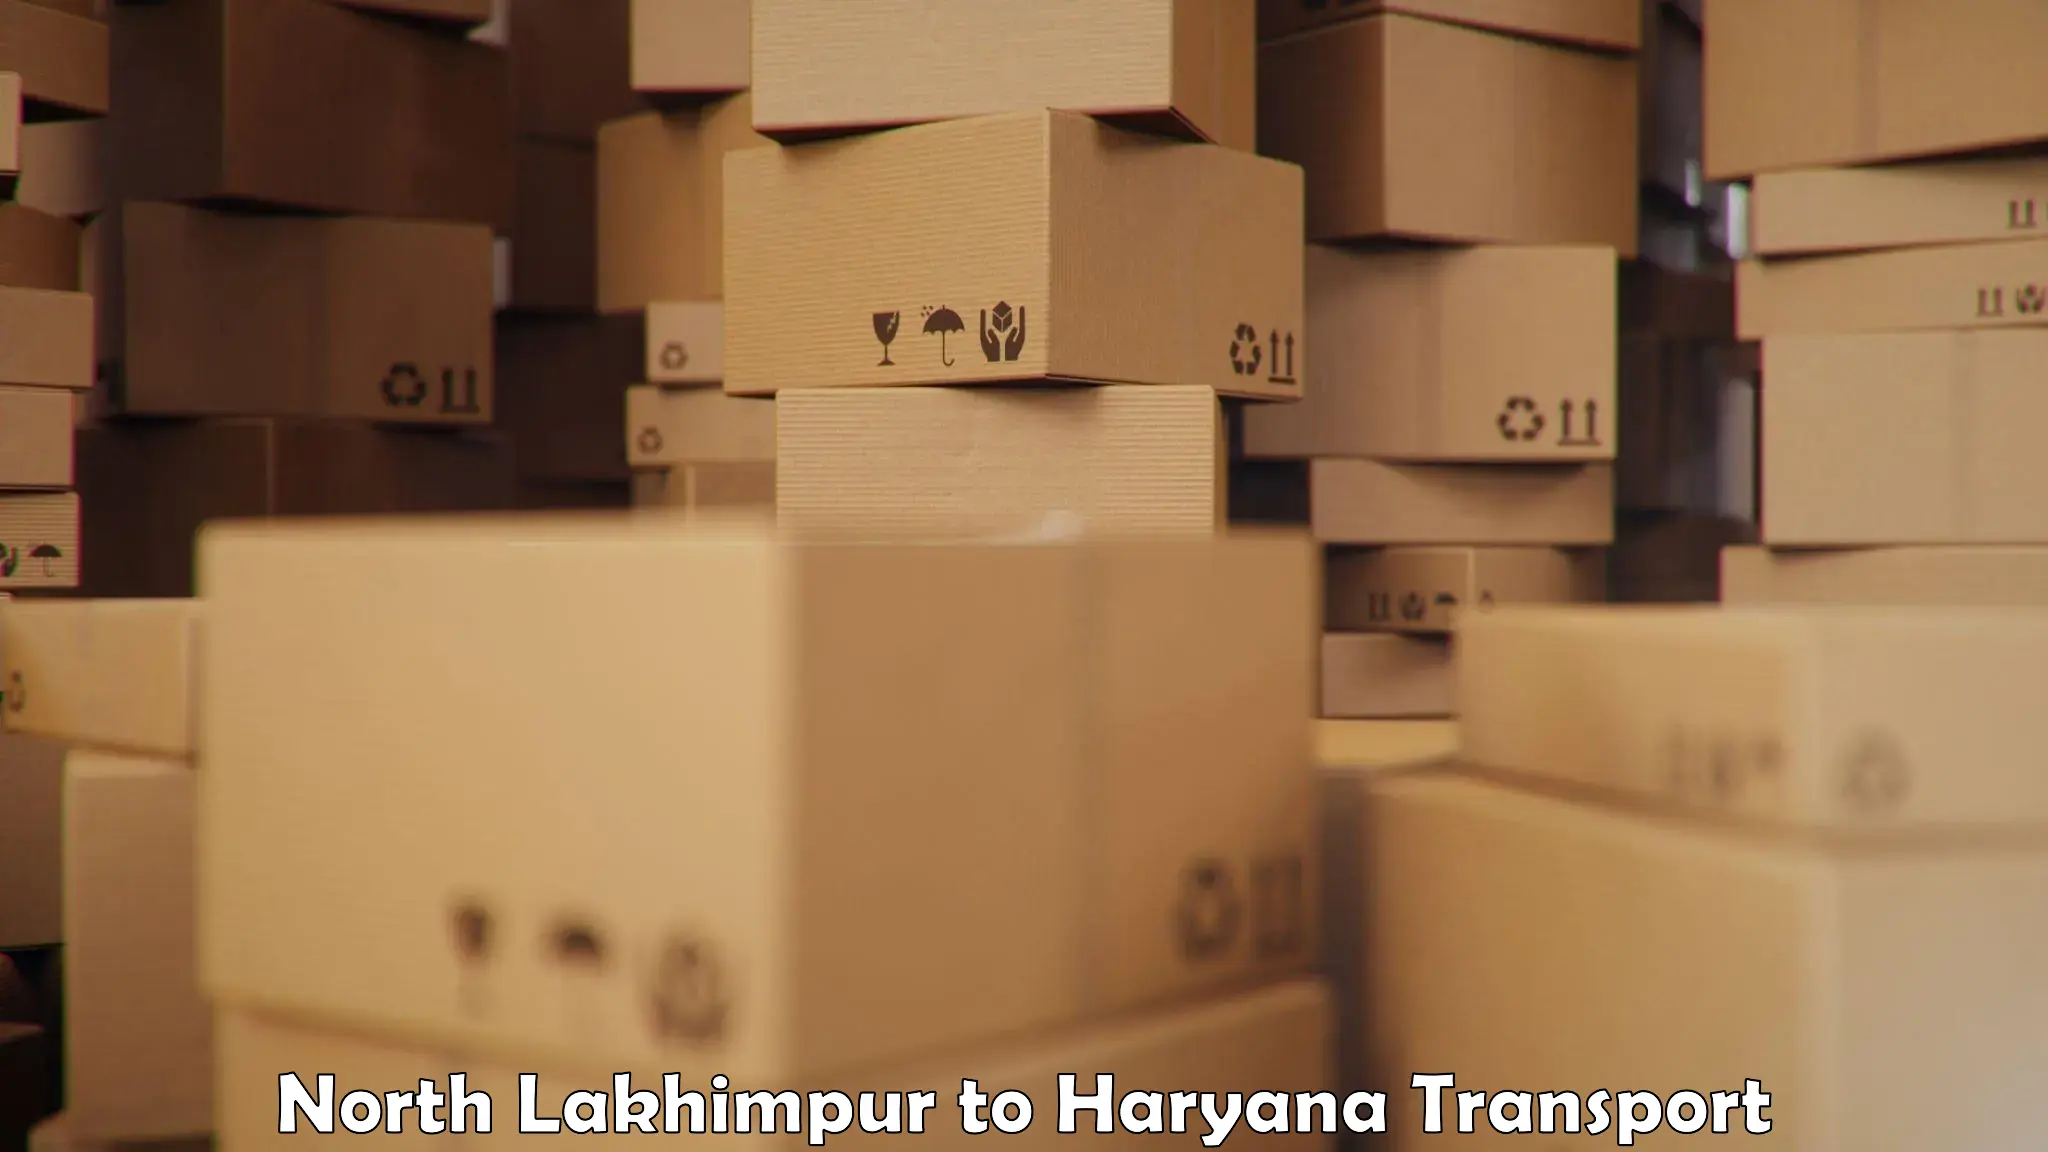 Air freight transport services in North Lakhimpur to Bhiwani